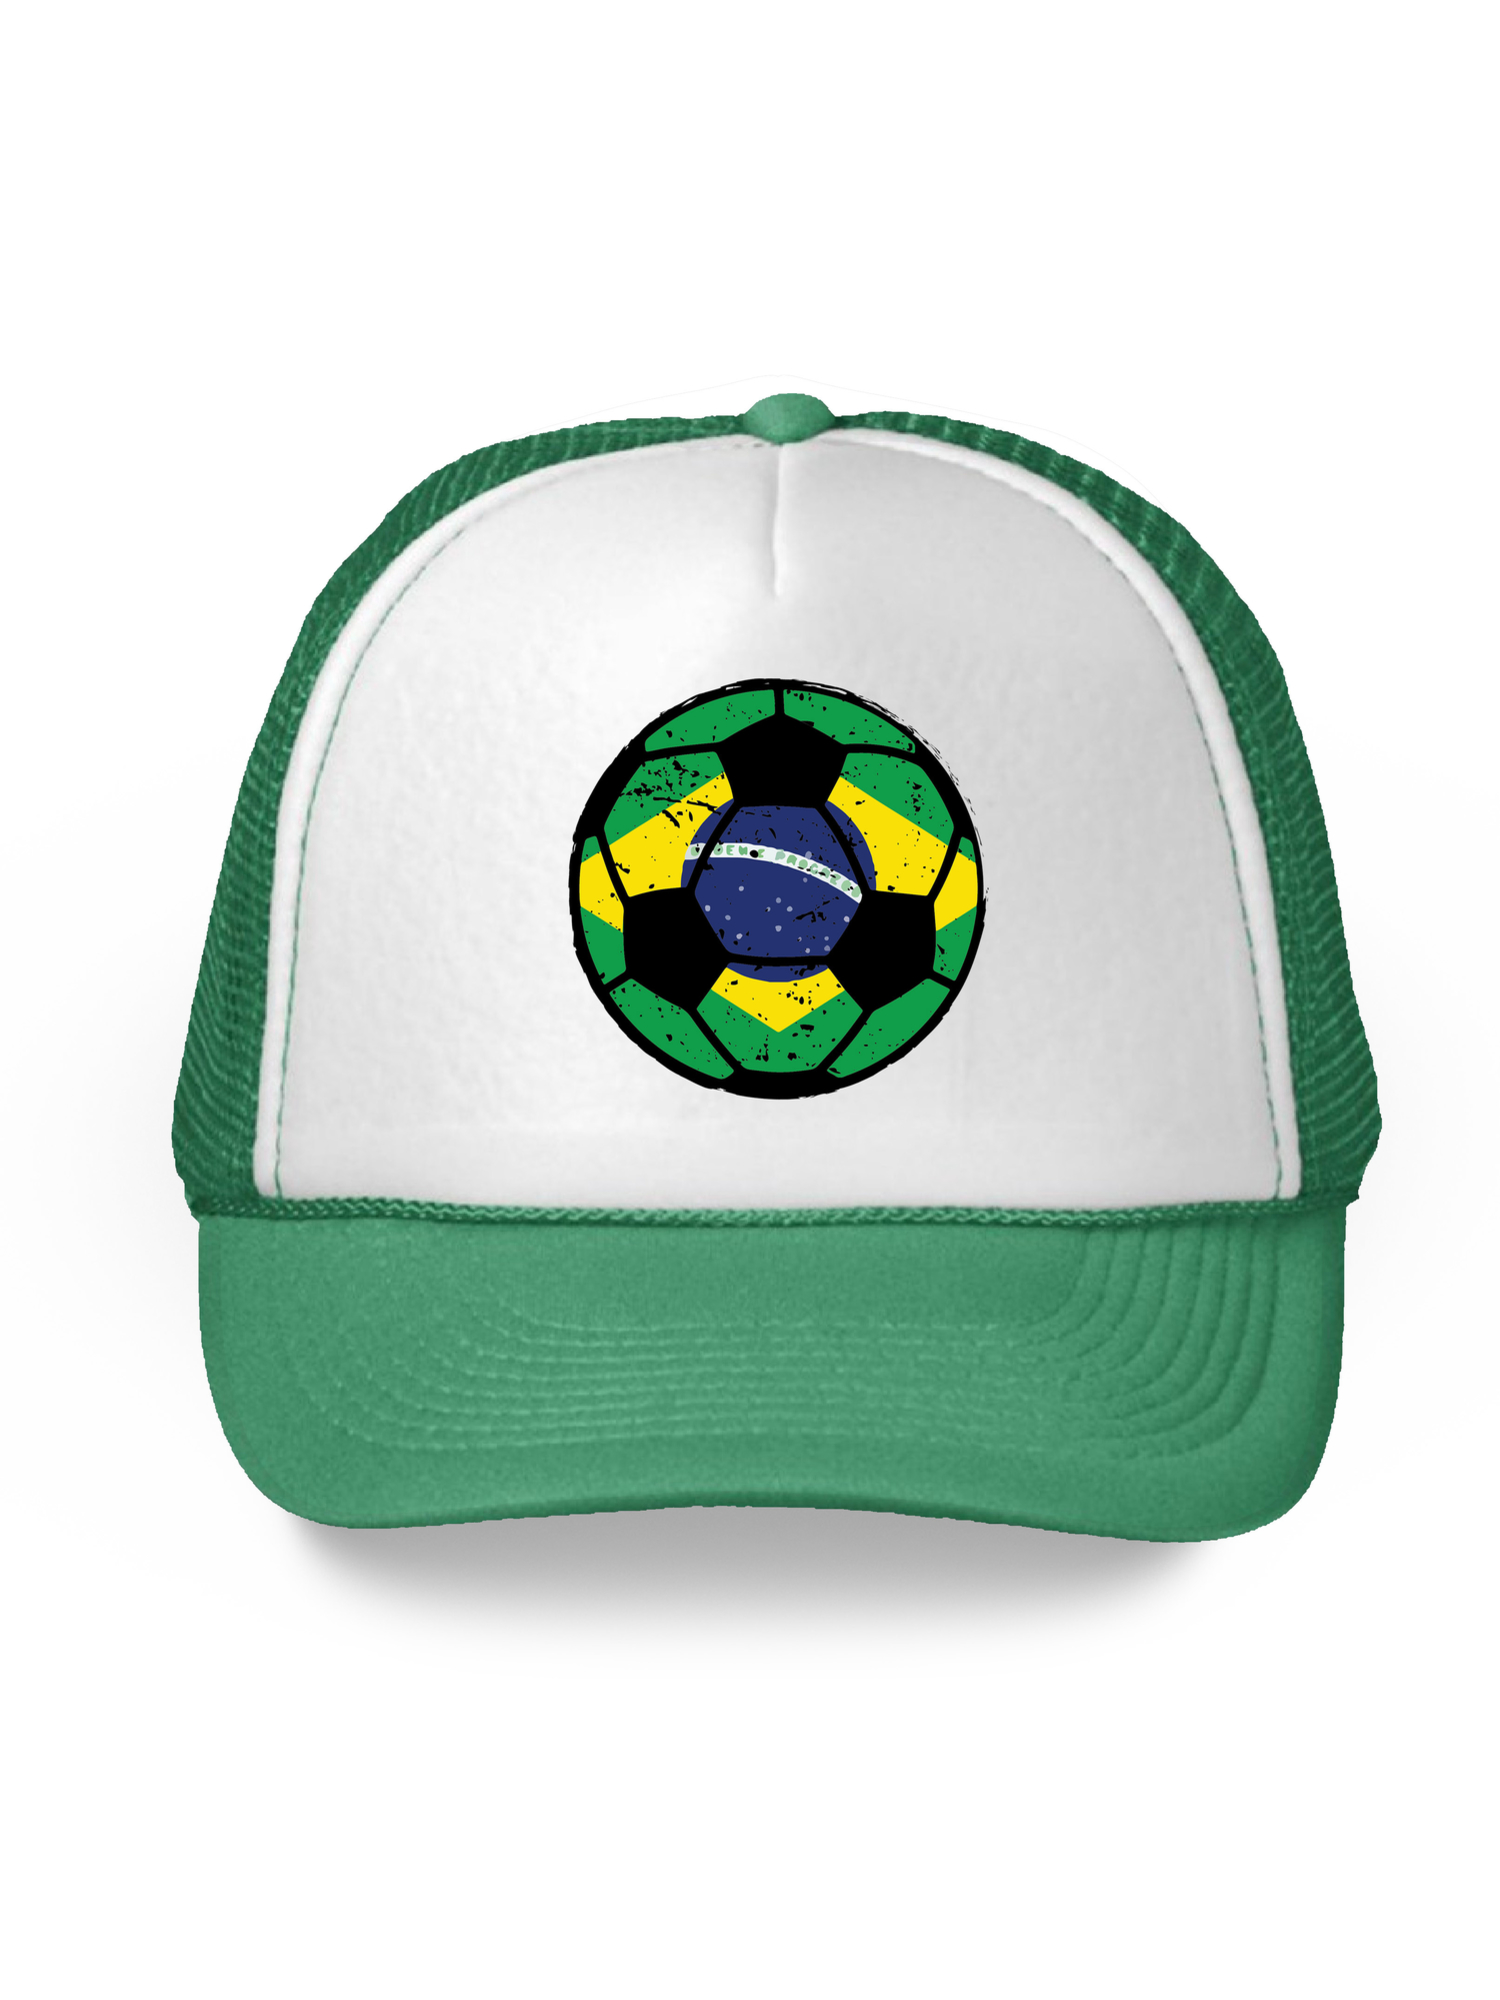 Awkward Styles Brazil Soccer Ball Hat Brazilian Soccer Trucker Hat Brazil 2018 Baseball Cap Brazil Trucker Hats for Men and Women Hat Gifts from Brazil Brazilian Baseball Hats Brazilian Flag Hat - image 1 of 6